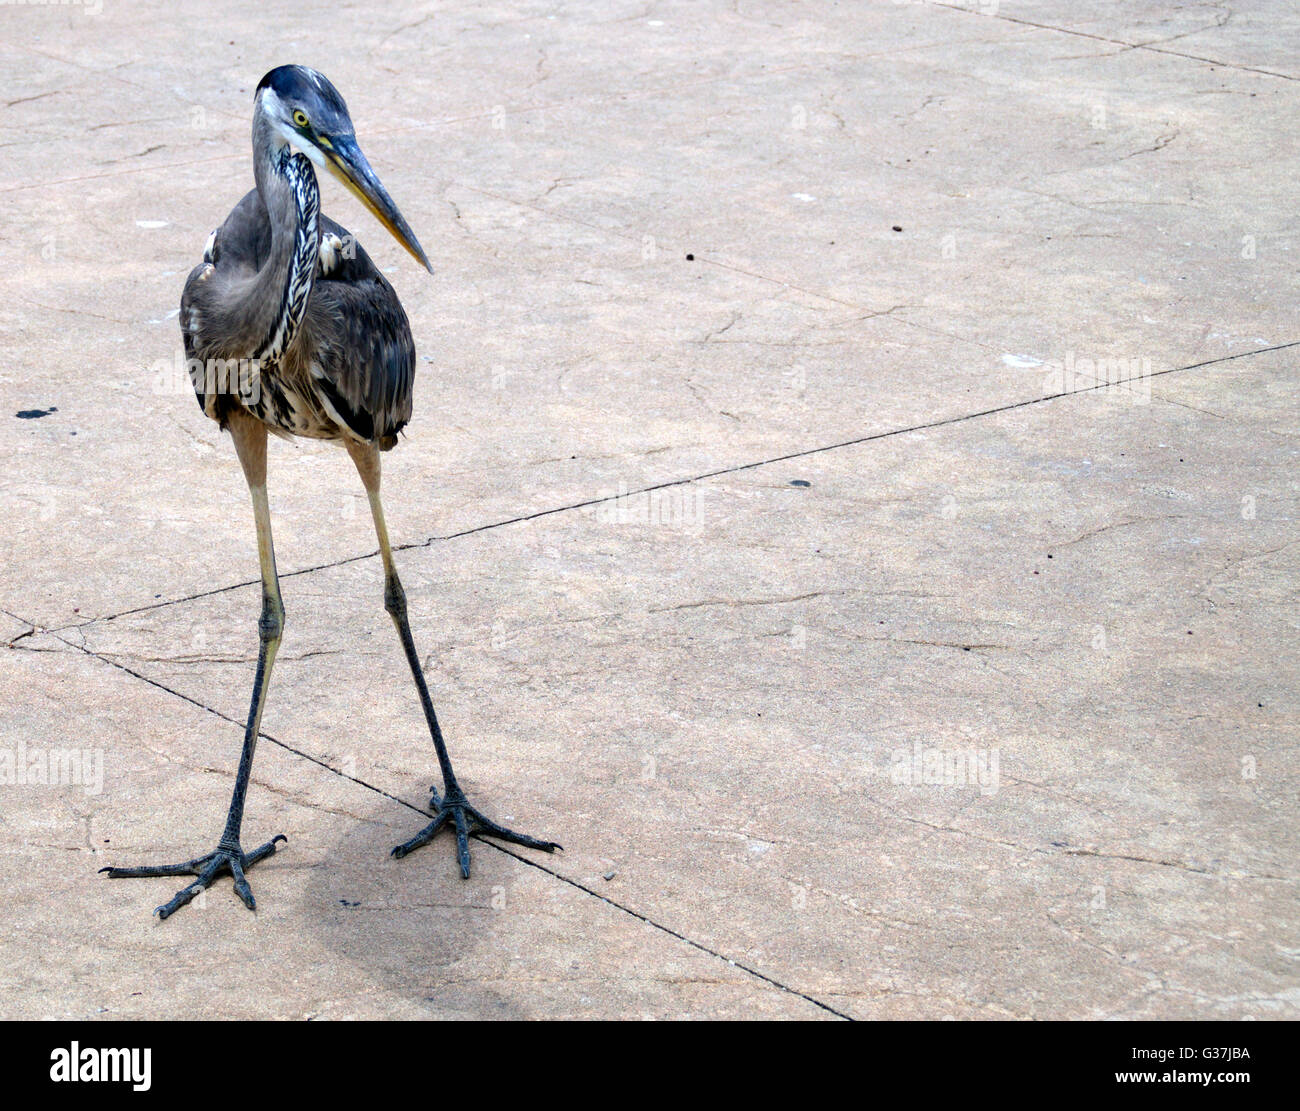 A bird found eagerly waiting for a fisherman's catch at a dock. Stock Photo